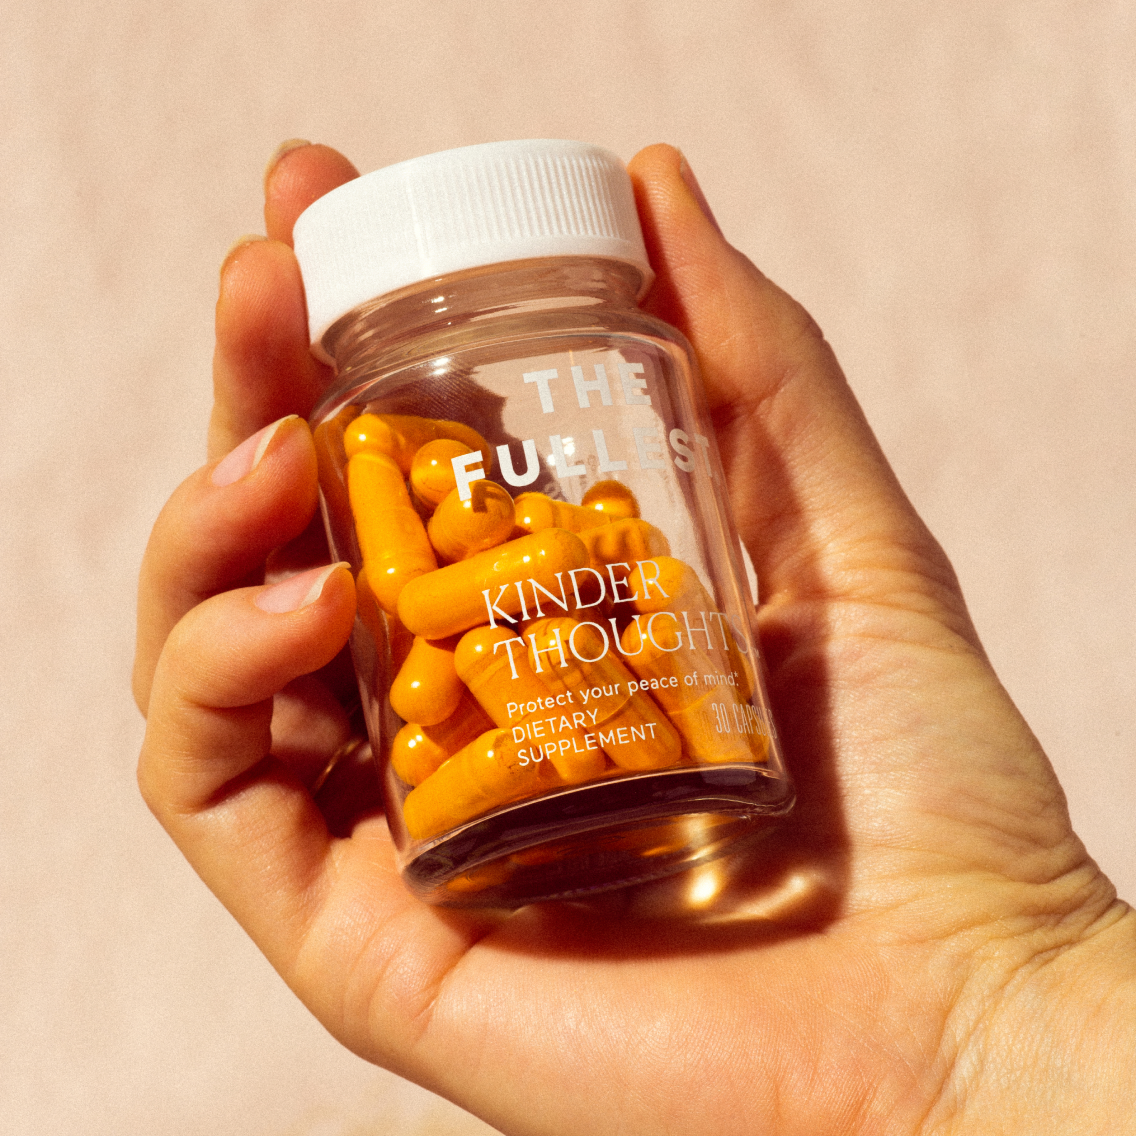 A clear bottle containing orange capsules with a label that reads "Kinder Thoughts," described as a mood-boosting supplement for peace of mind by THE FULLEST.